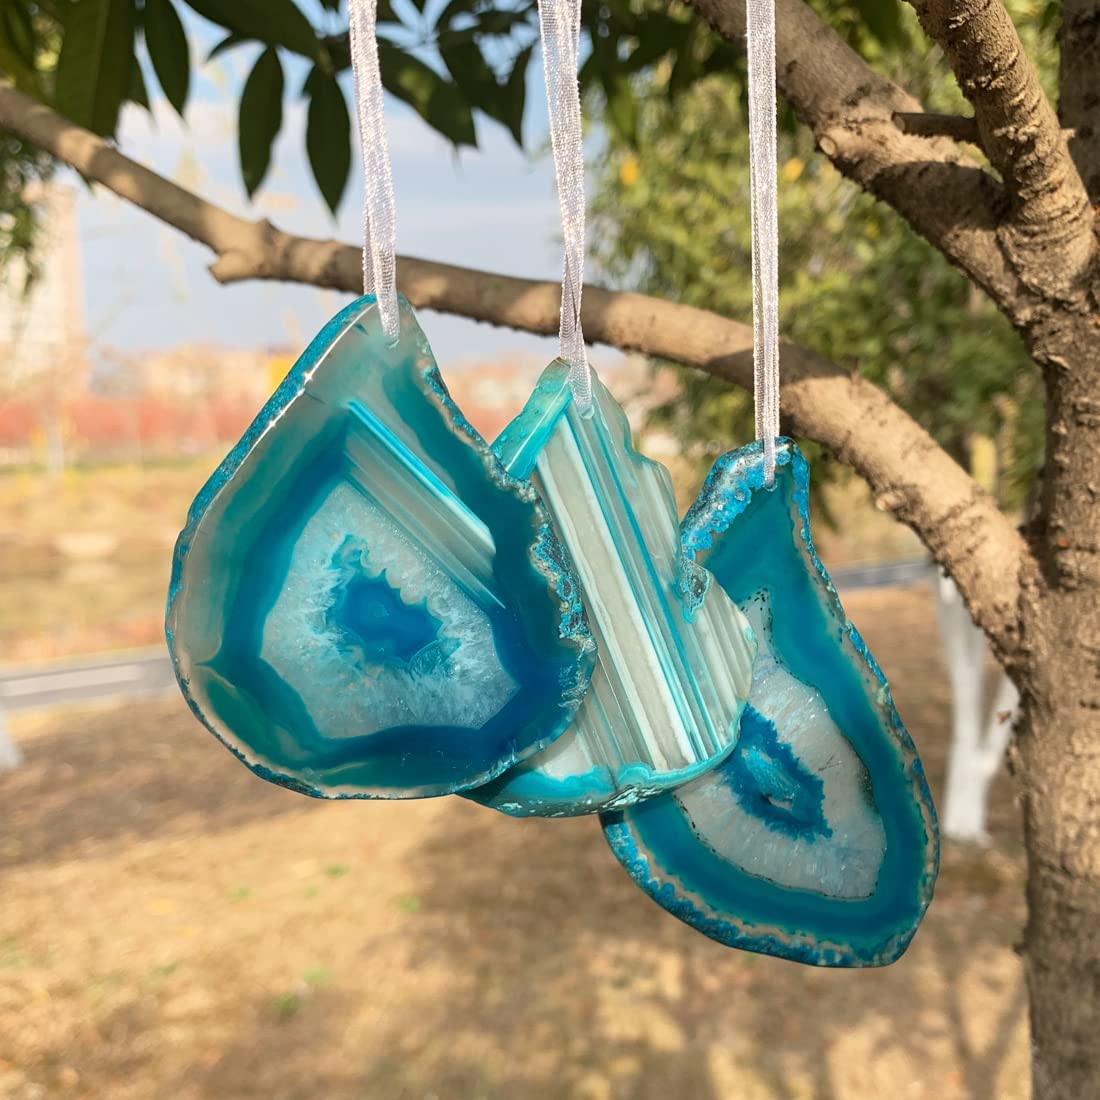 Where to Buy Agate Slice Ornaments